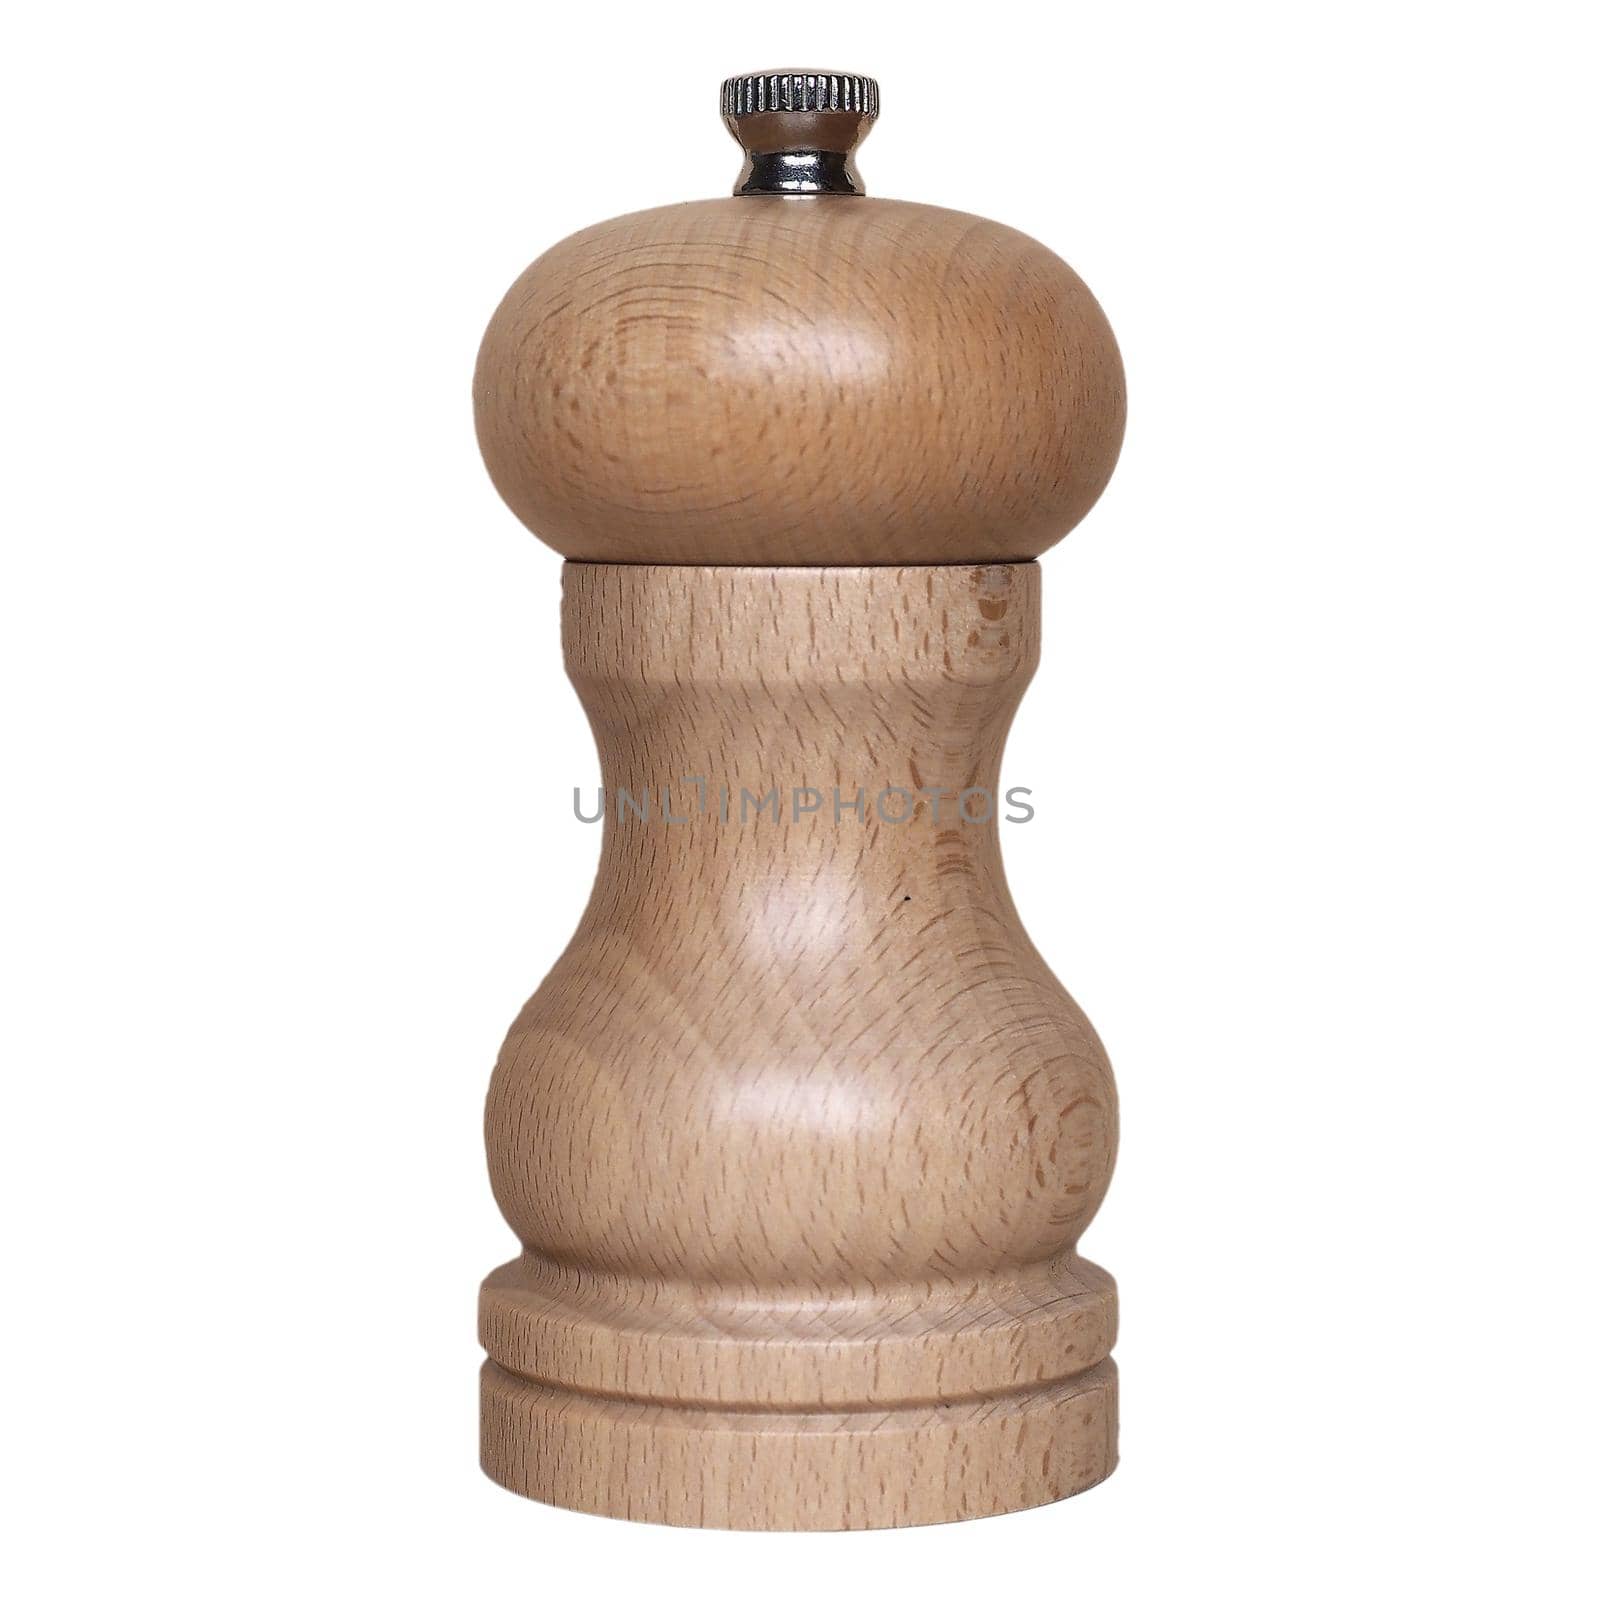 Wooden salt or pepper mill grinder kitchen tools isolated over white background